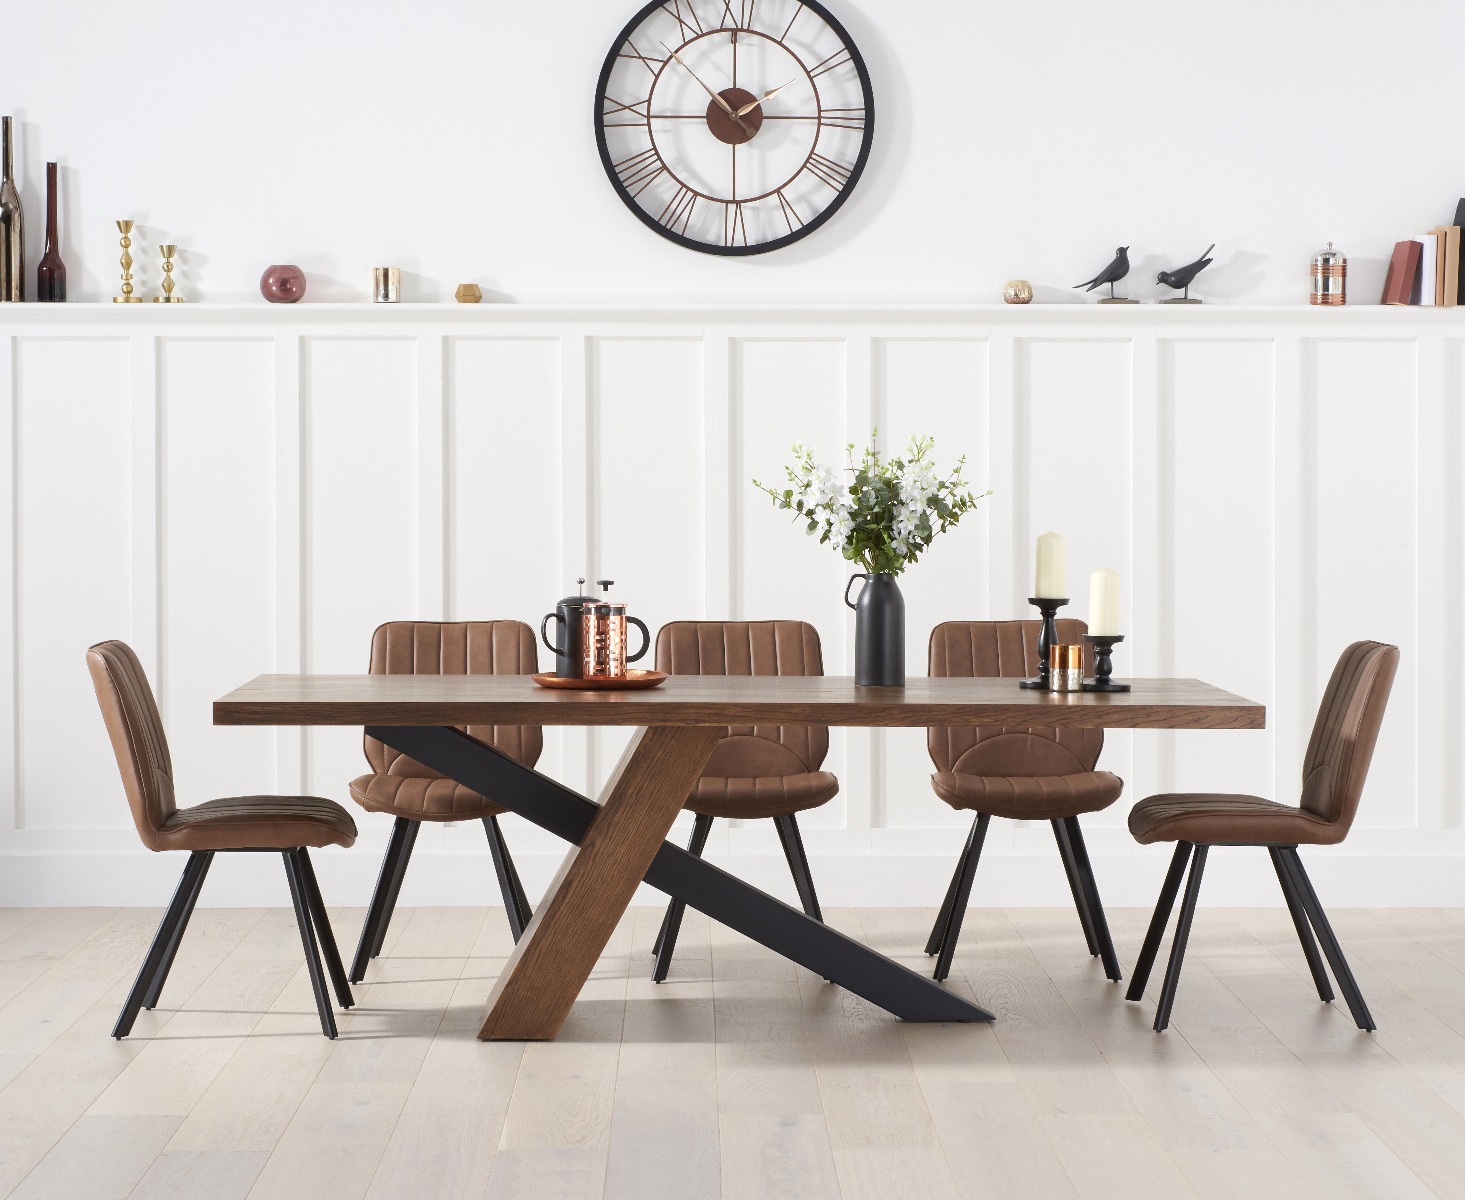 Michigan 180cm Black Leg Industrial Dining Table With 8 Brown Hendrick Faux Leather Dining Chairs